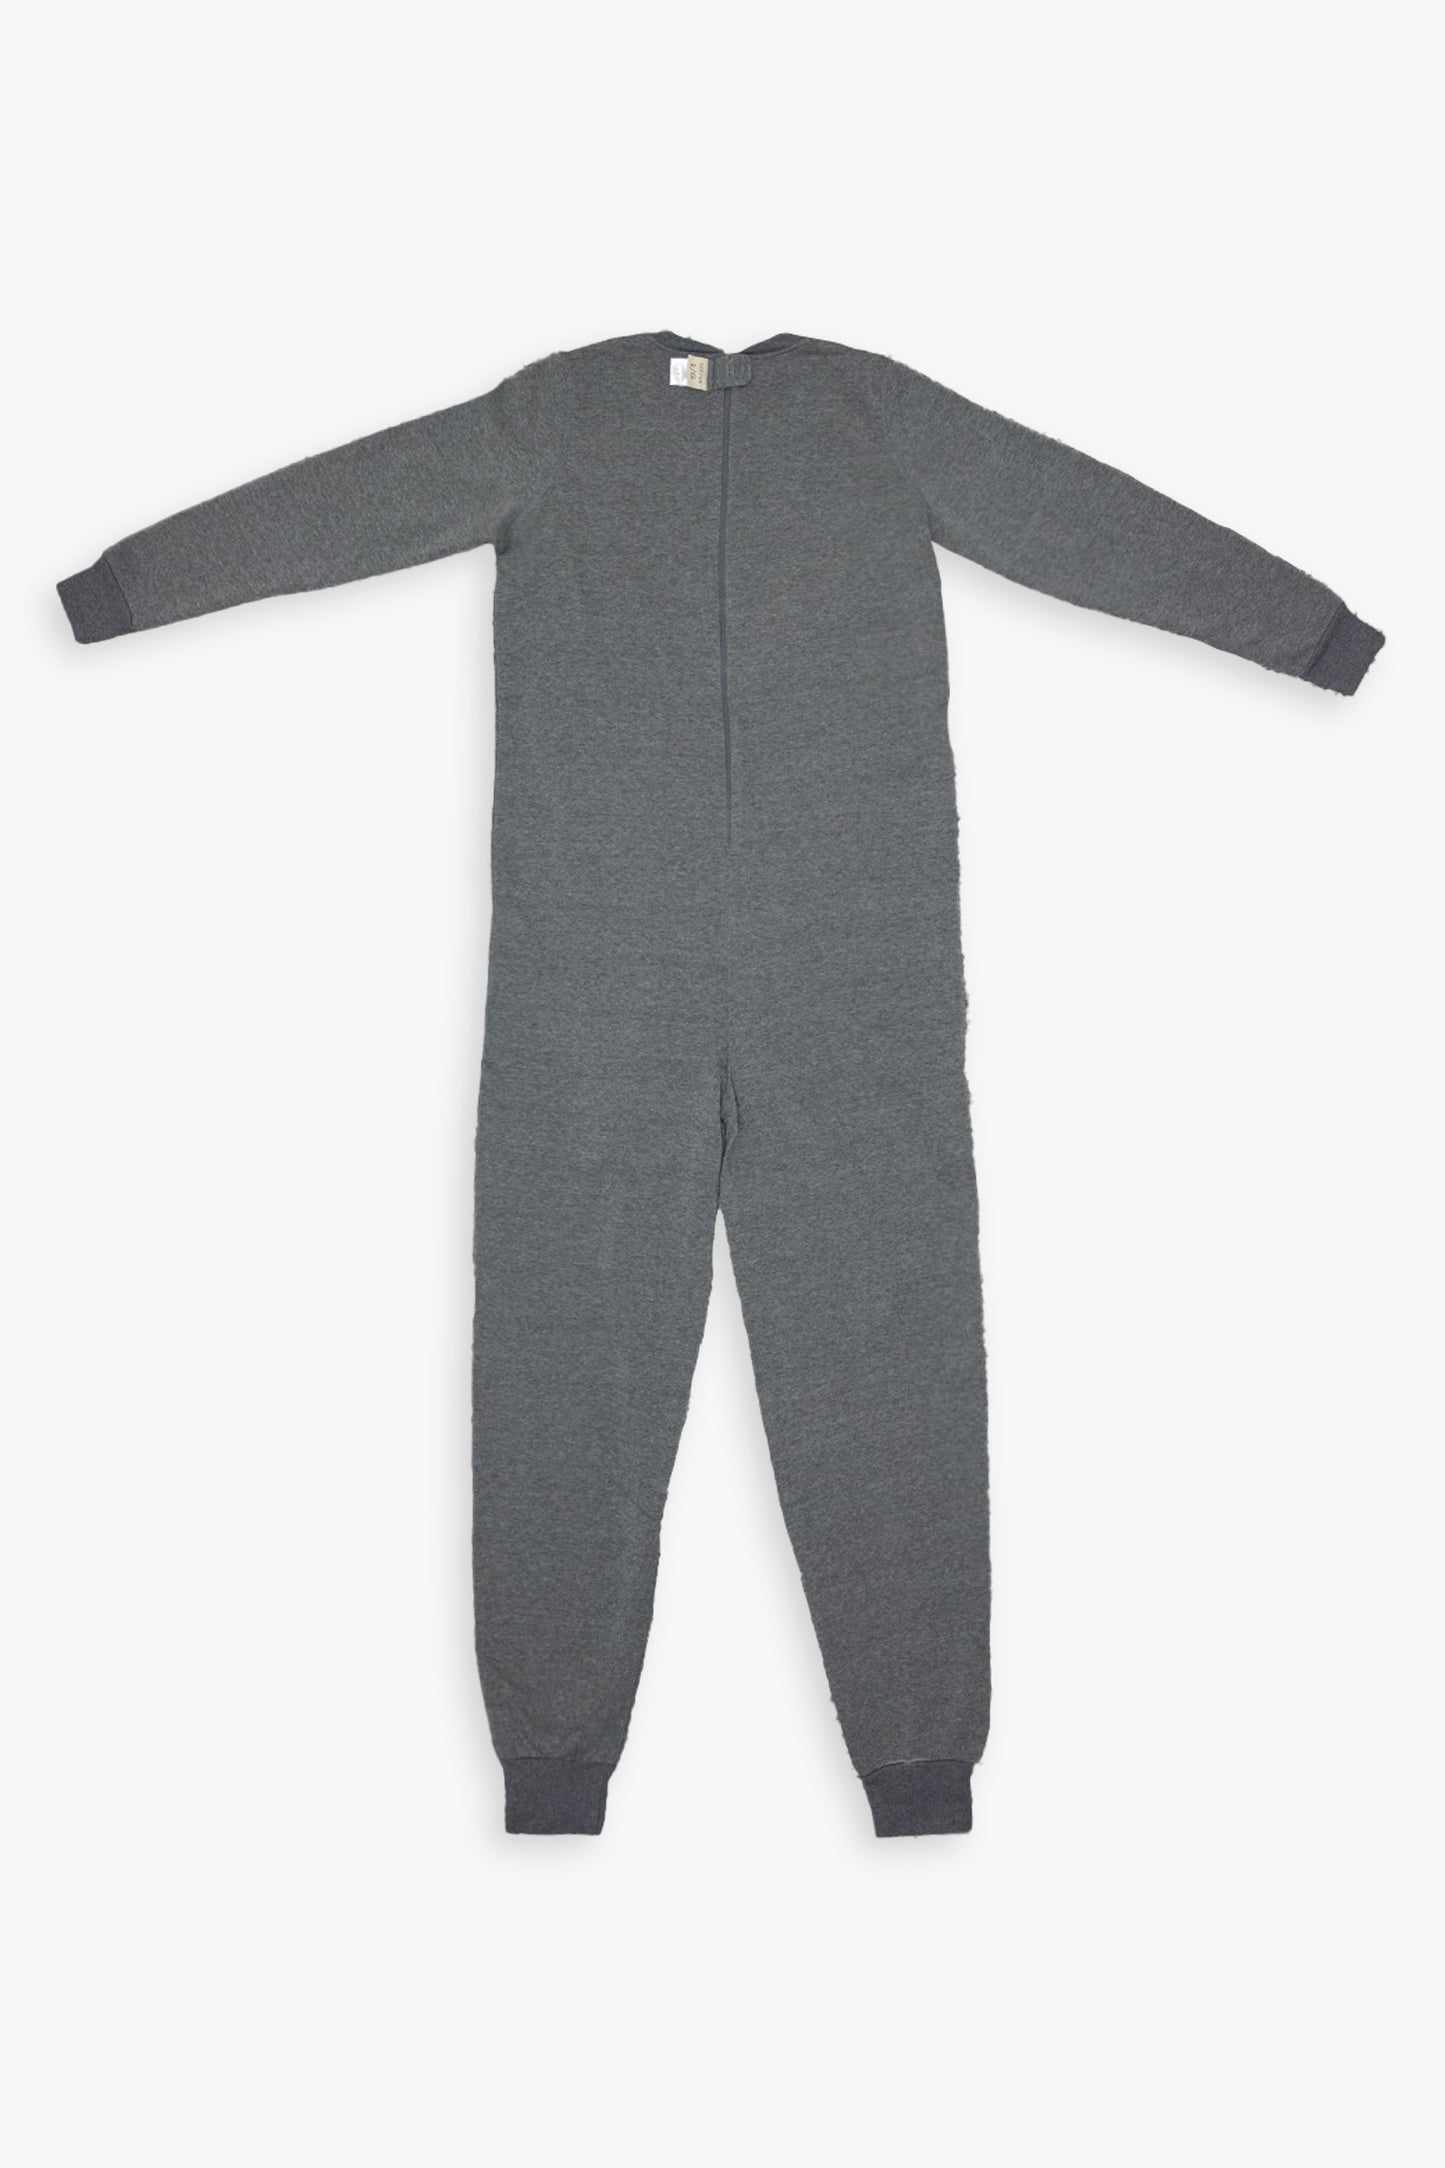 Capri Length Solid Back-Zip Sleep Suit Adaptive Clothing for